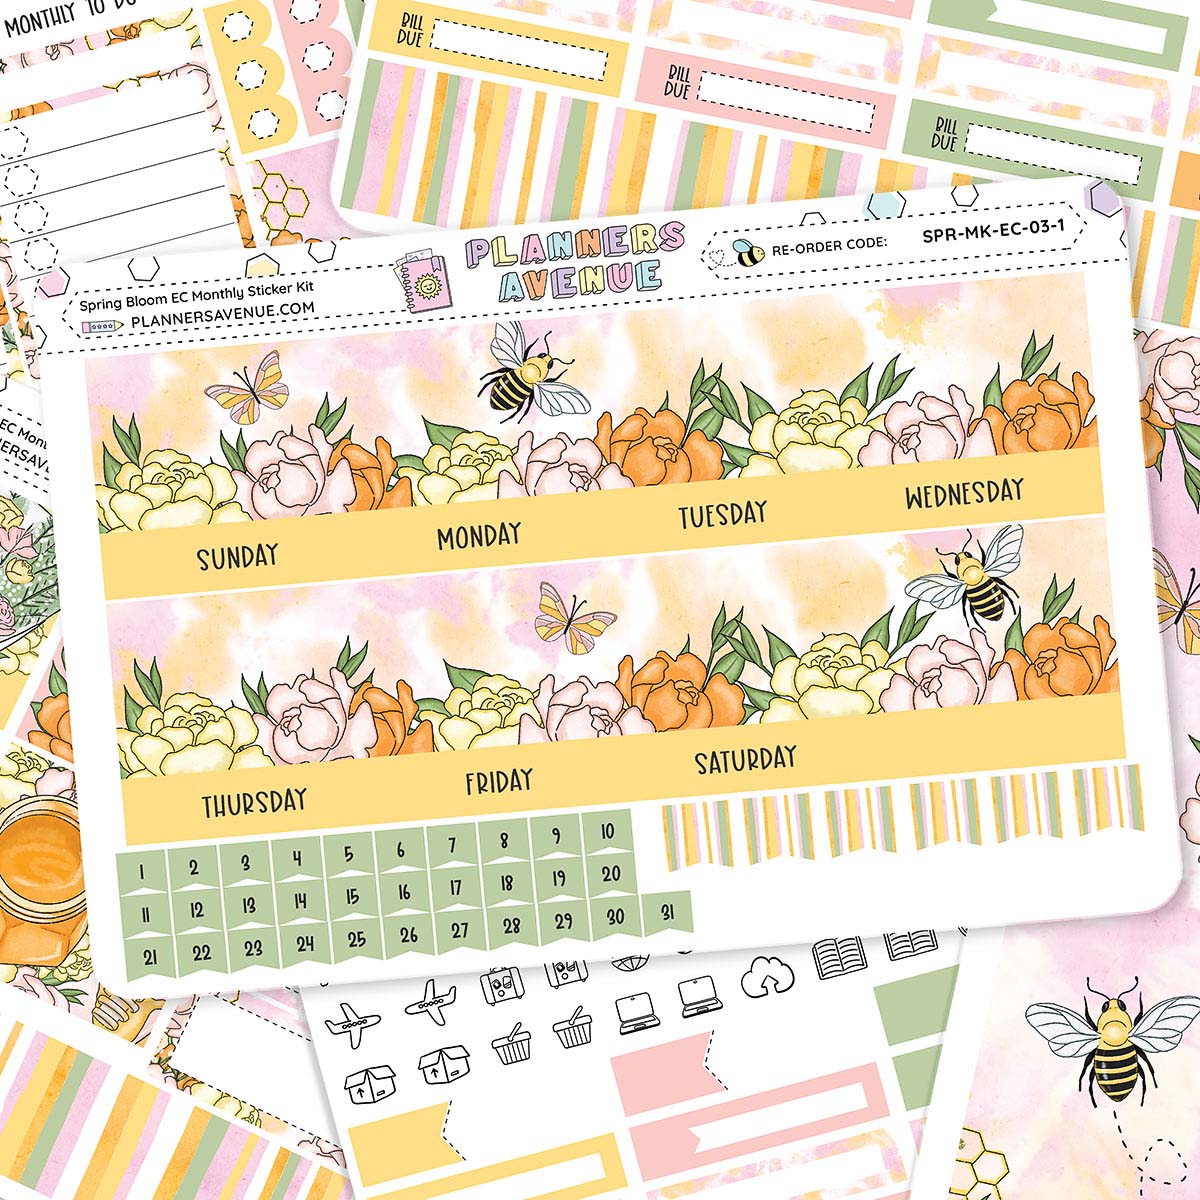  Monthly Planner Stickers Rainbow Meal Planning Stickers Planner  Labels Compatible with Erin Condren Vertical Life Planner